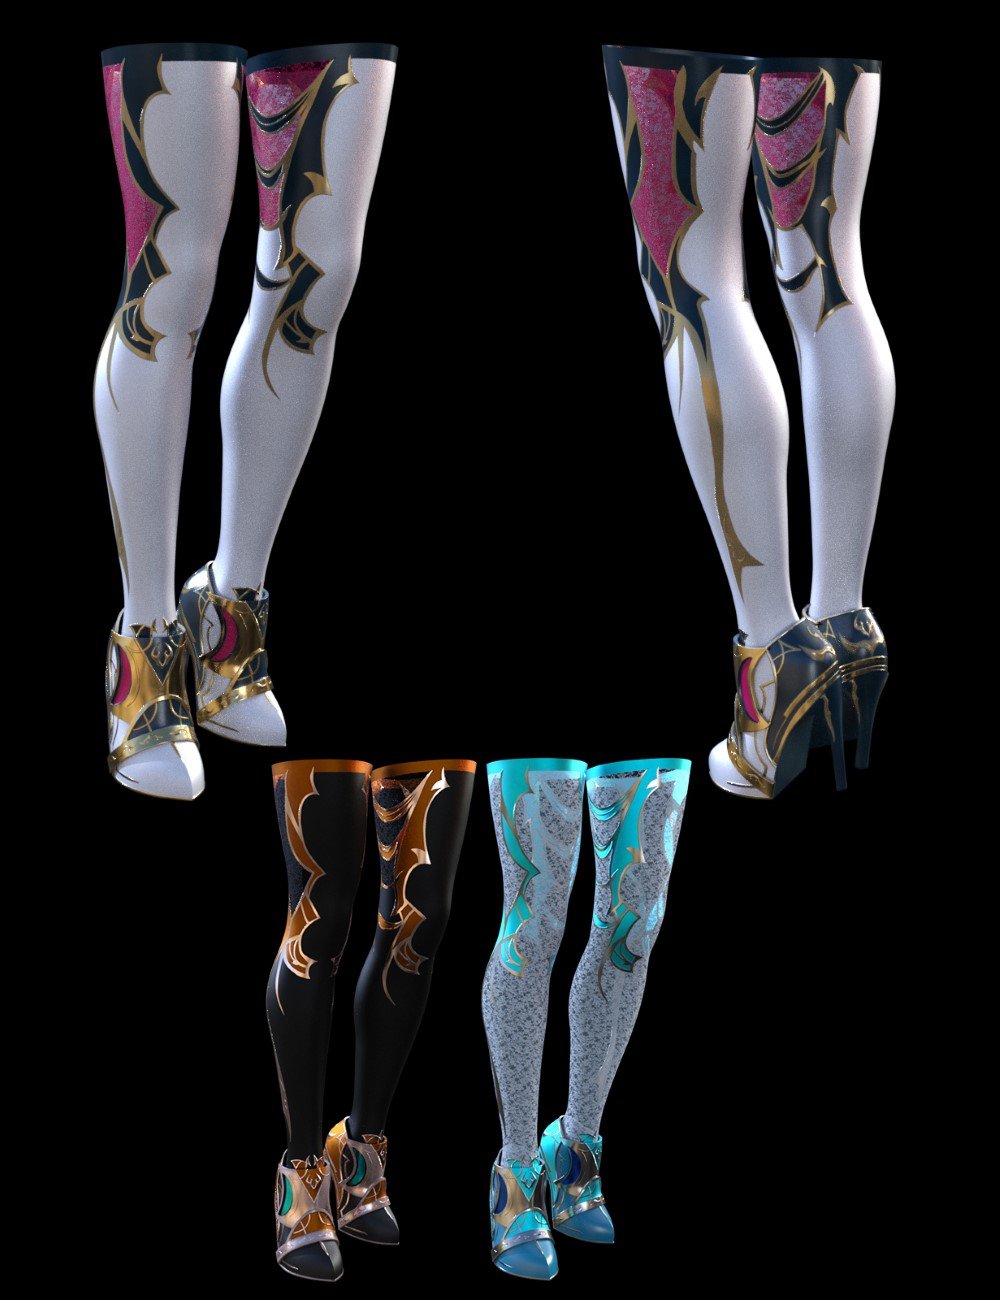 ZK Elpis Mage Armor Boots and Stockings for Genesis 8 and 8.1 Females